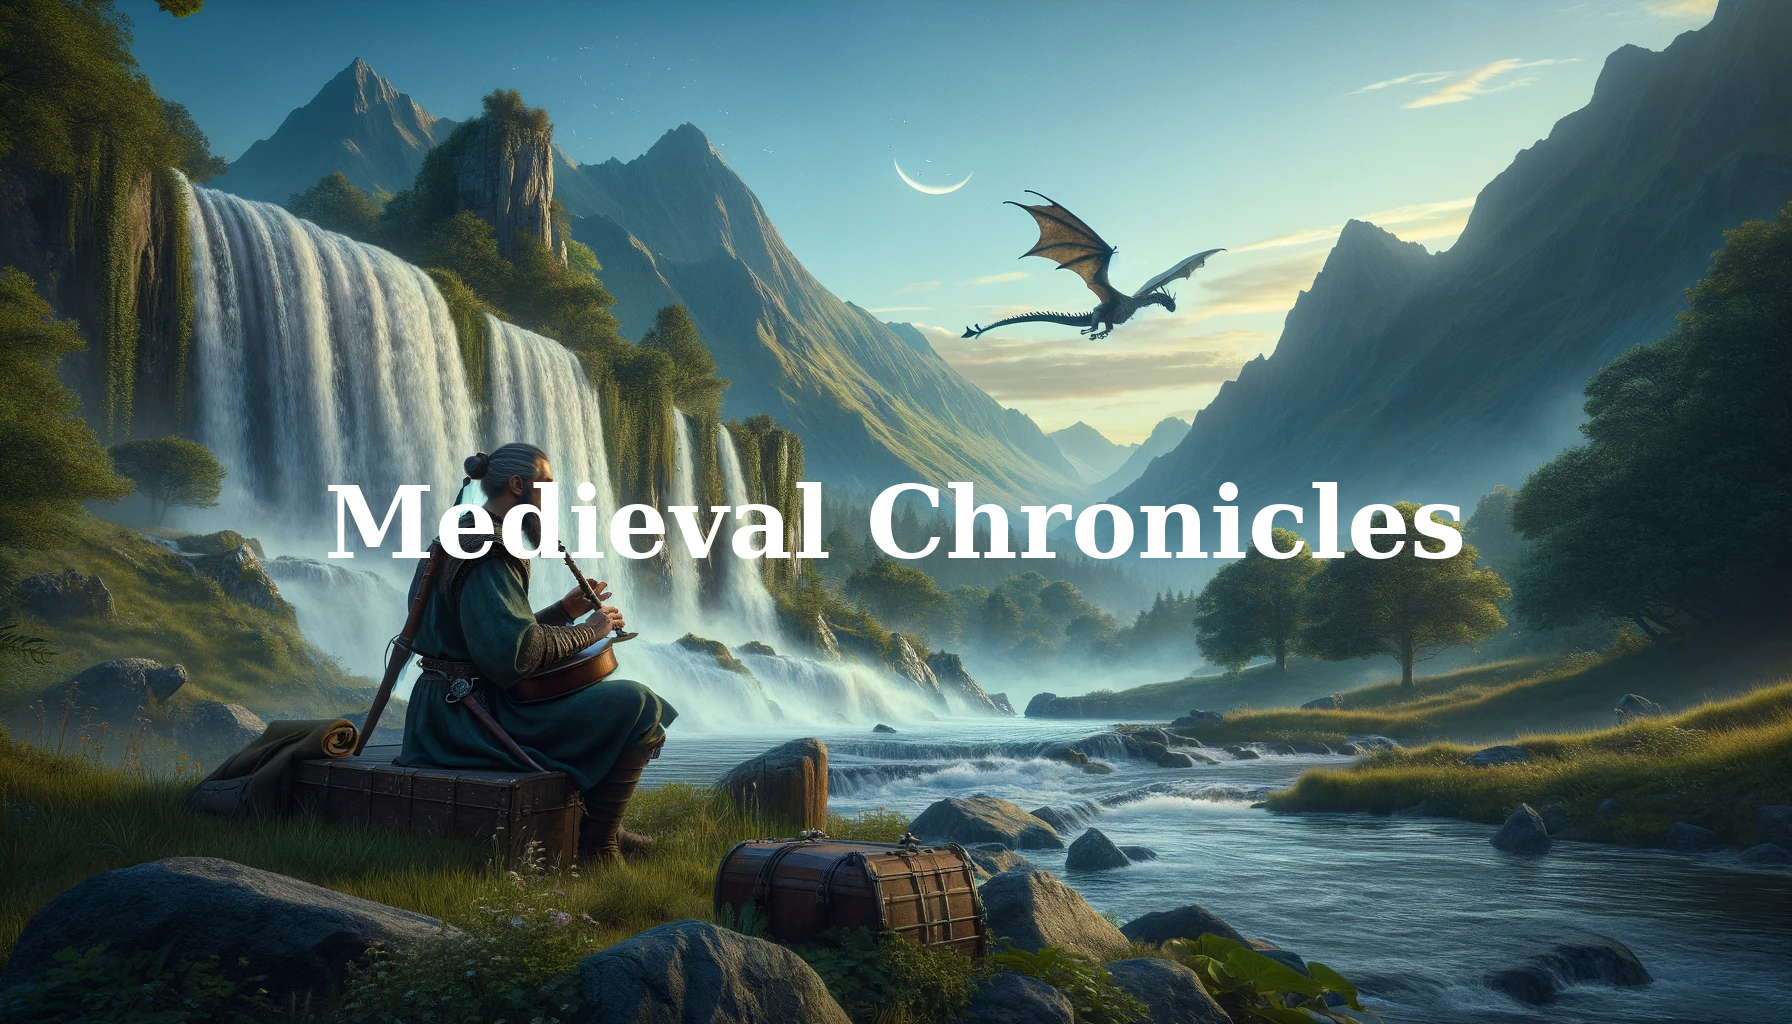 Medieval Chronicles: Soundscapes for Role-Play